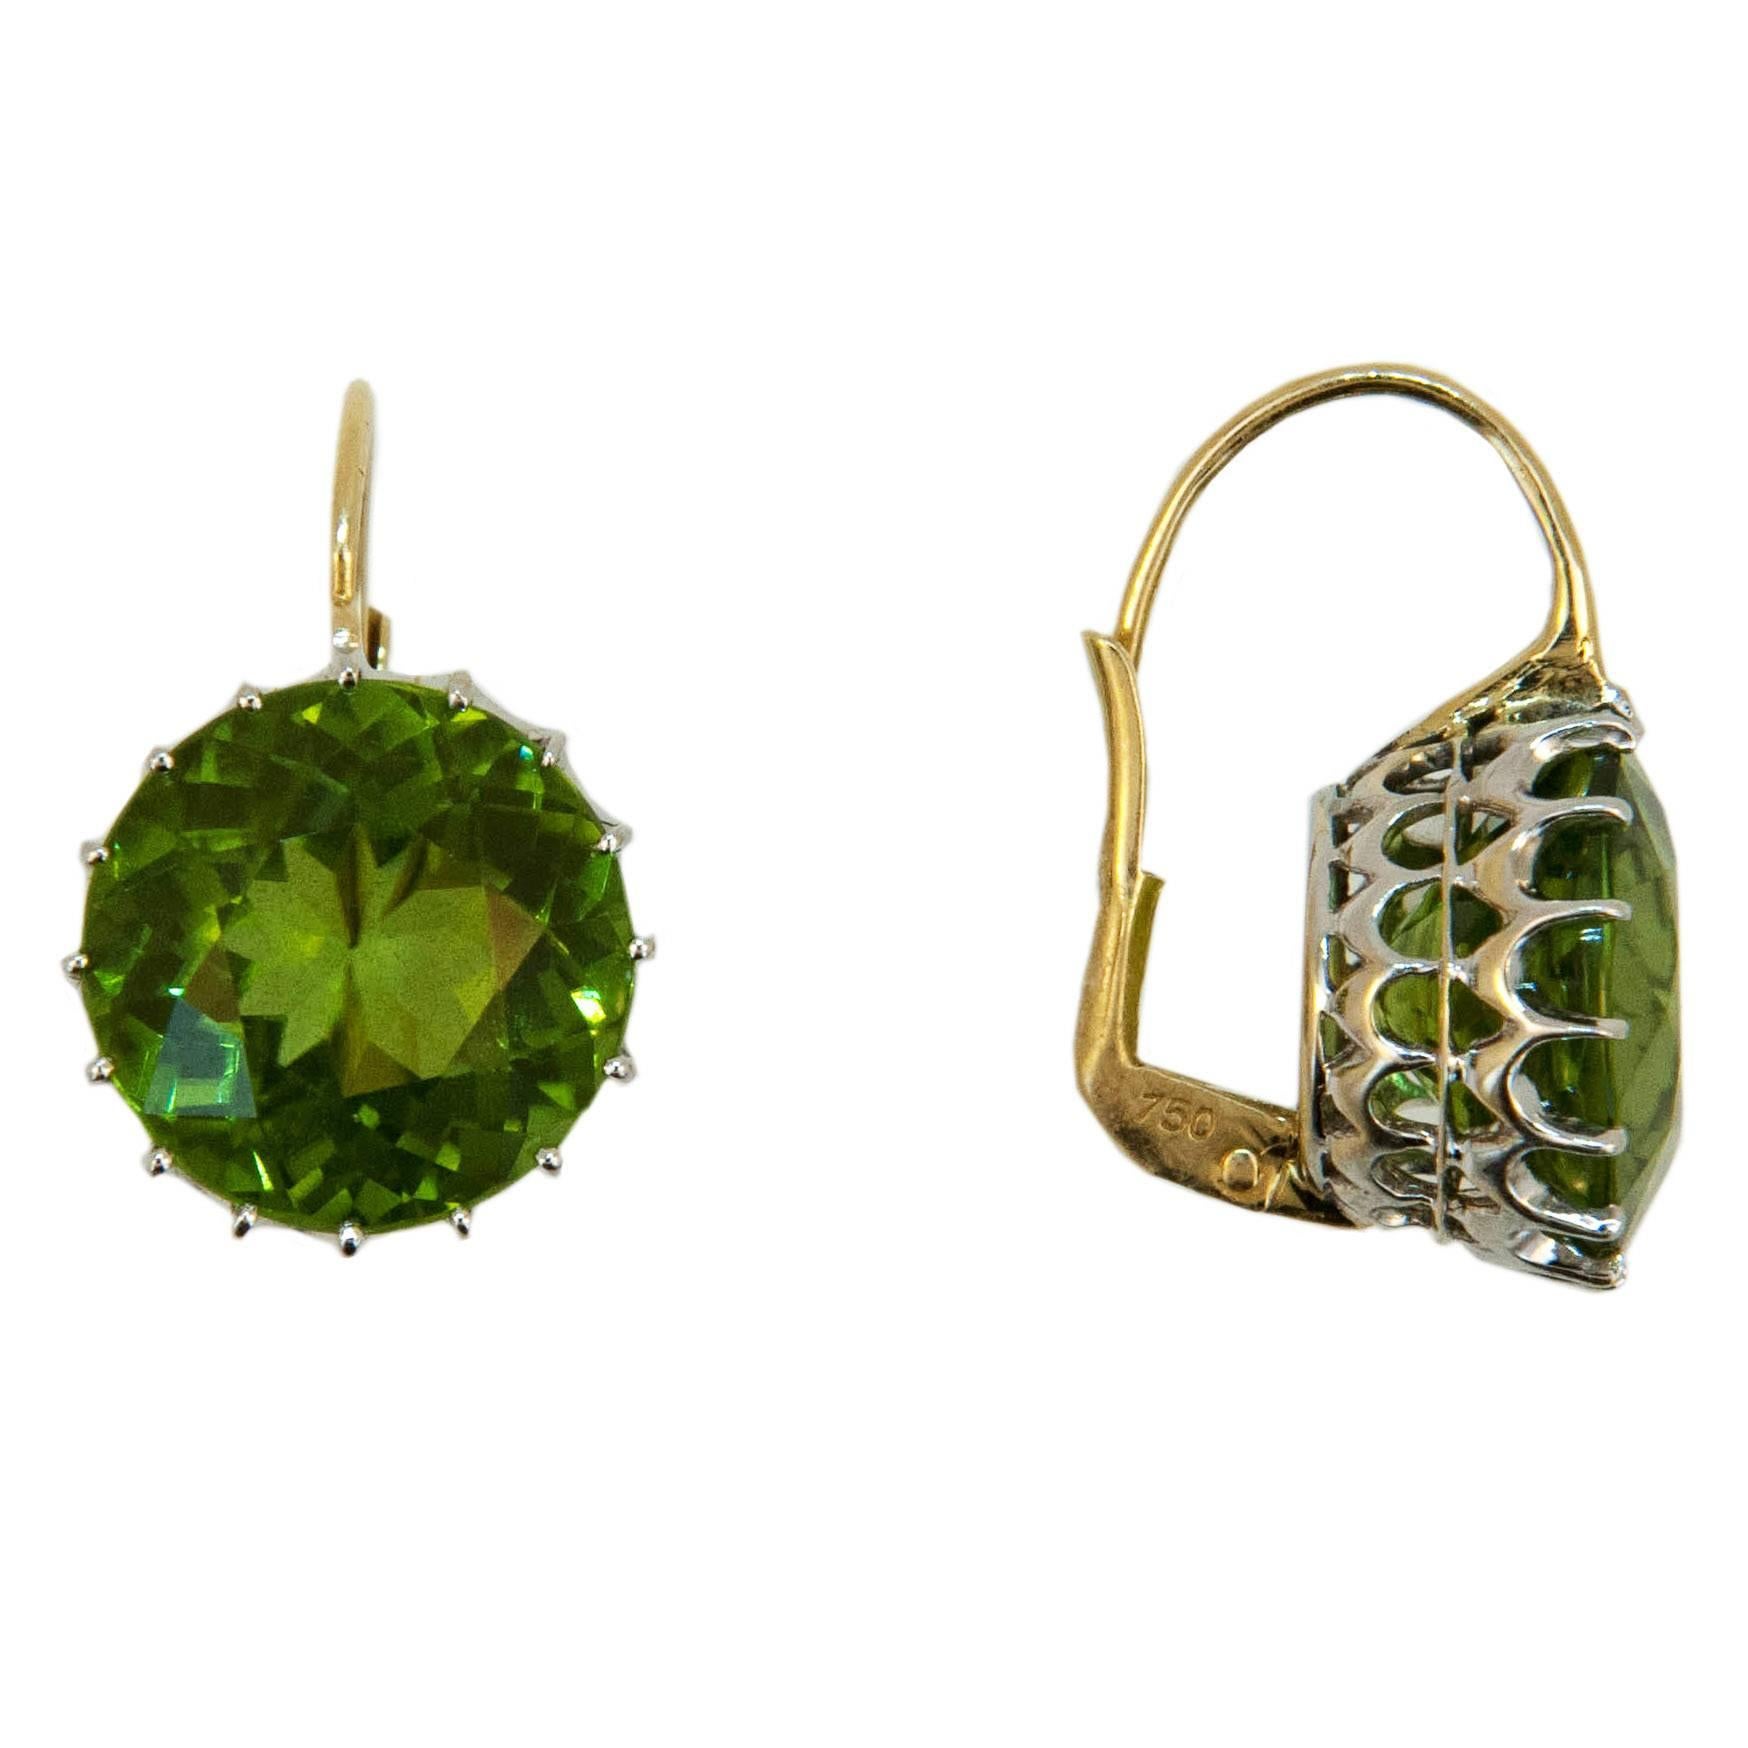 18 karat white gold and yellow gold wire earring round faceted Peridot 13.5 millimeters 18.44 carats total weight. Multi-prong white gold basket with yellow gold wires. Leverbacks.